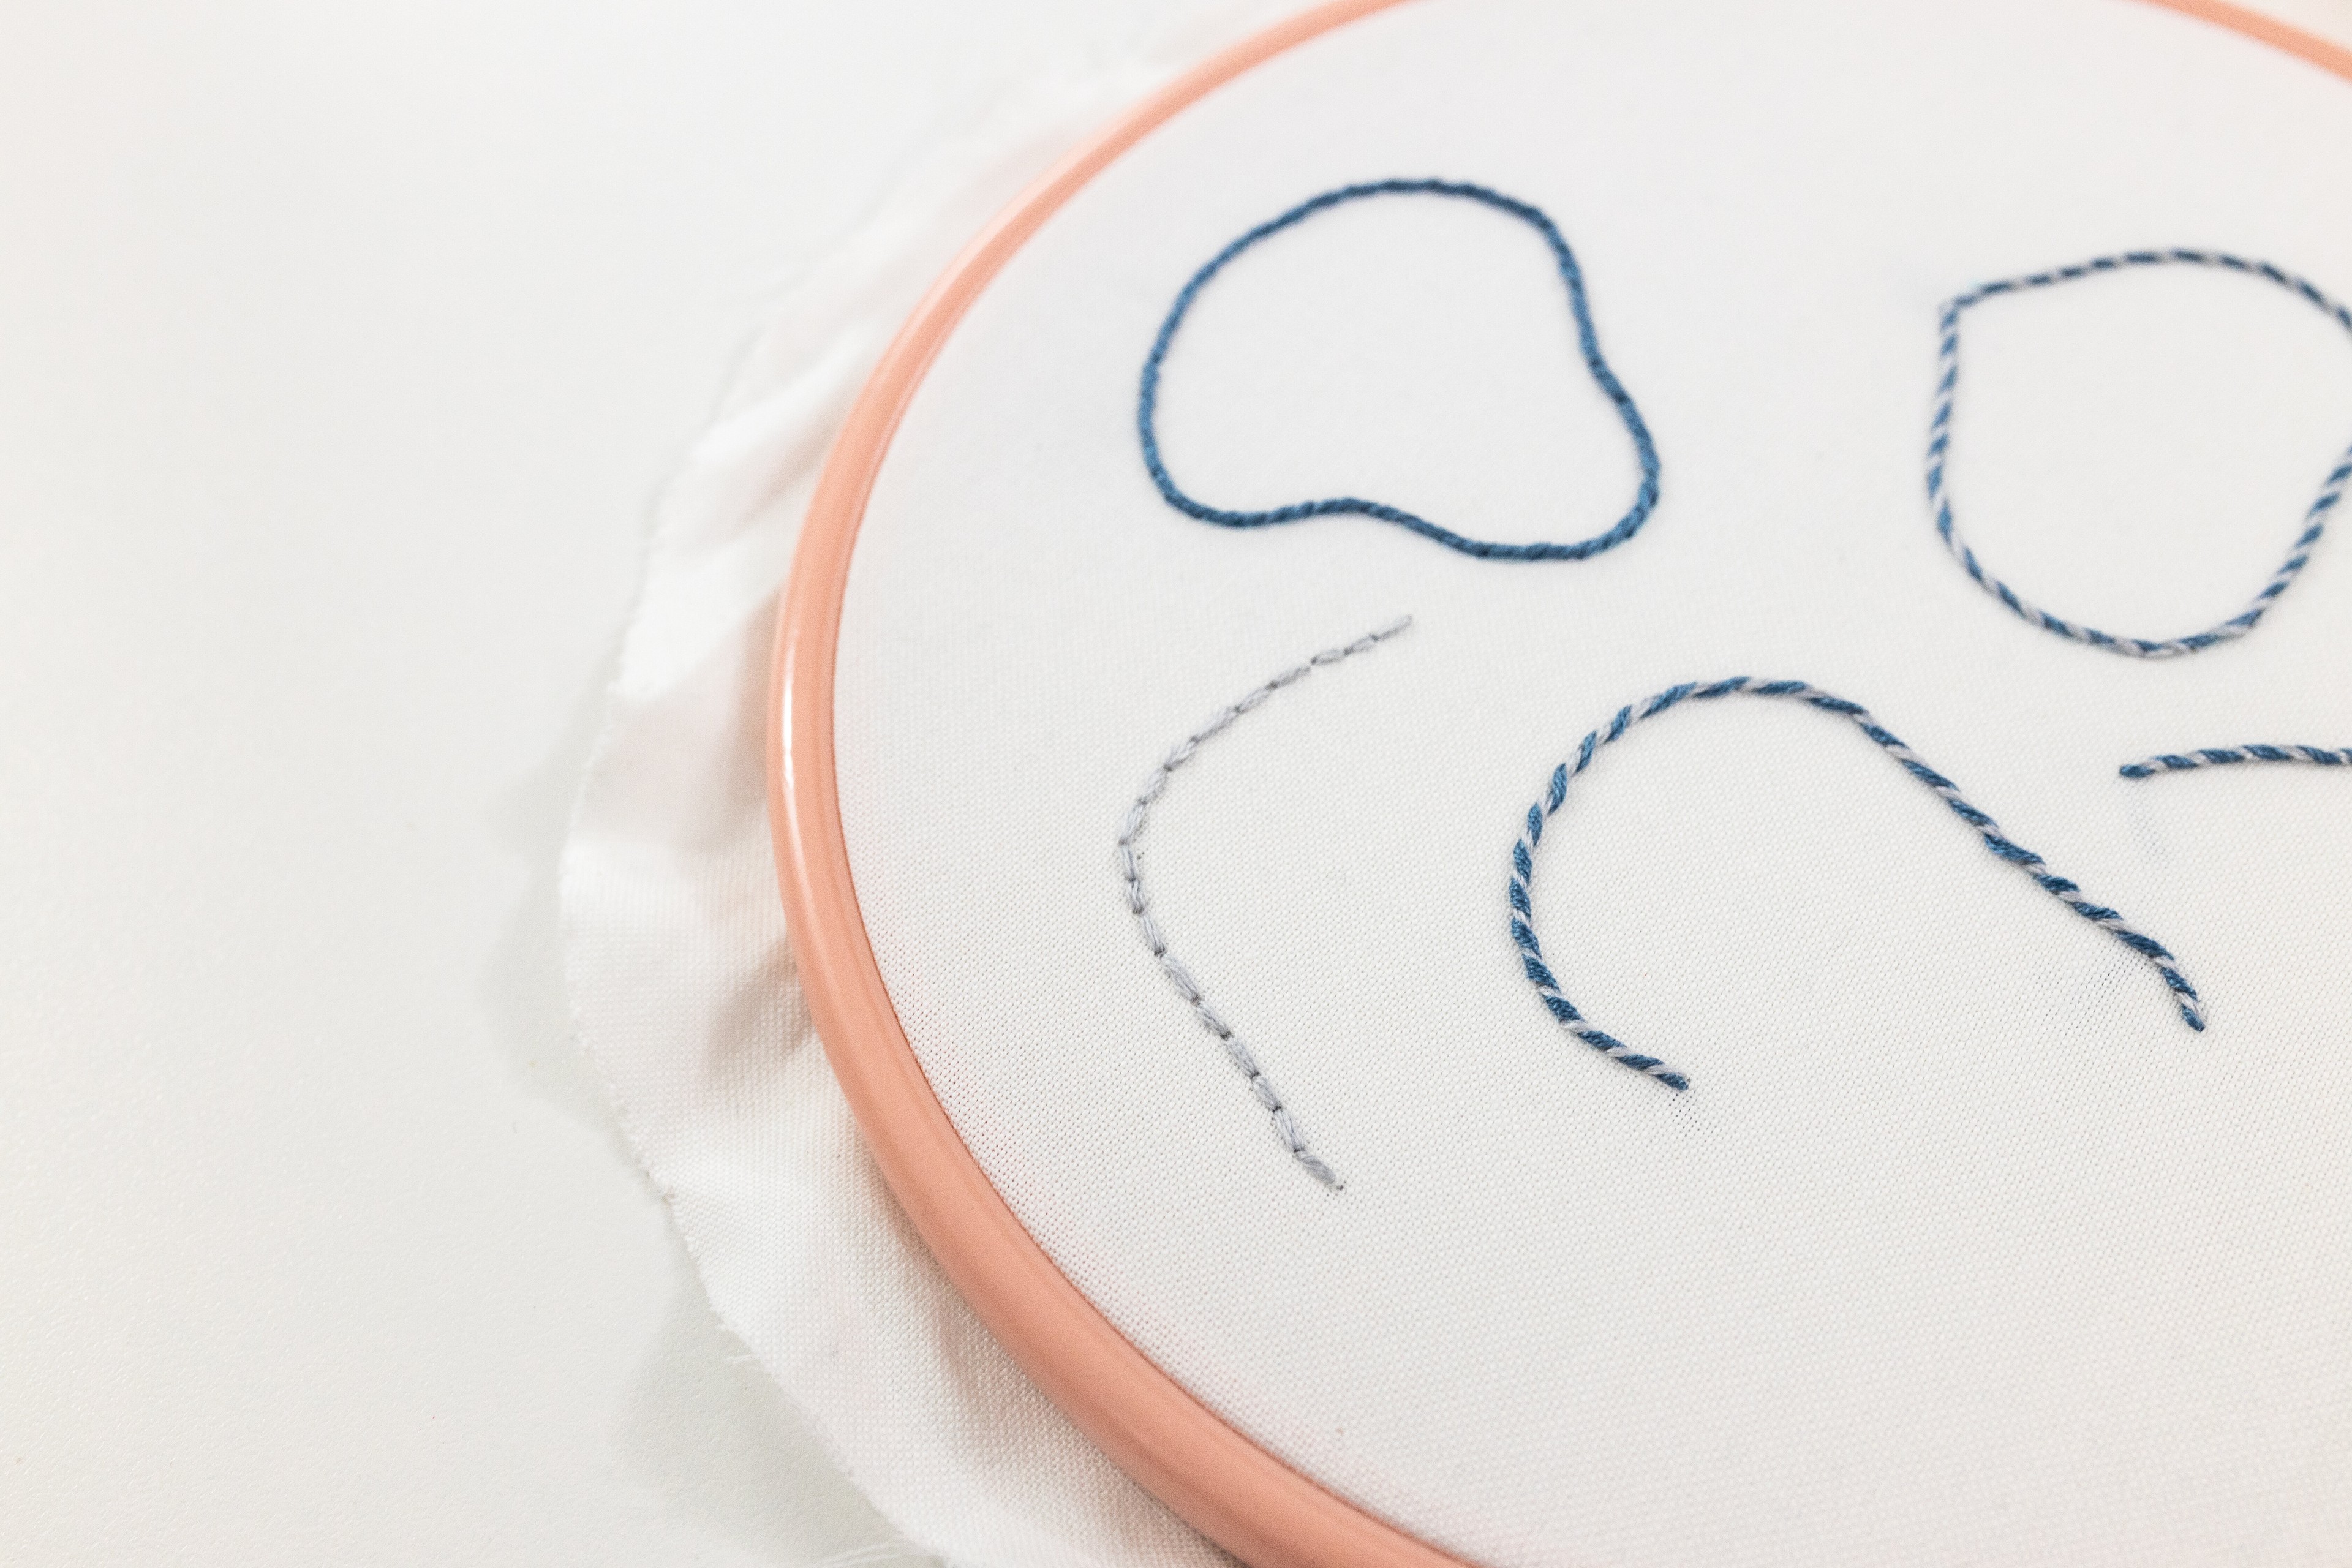 This is an image of a hoop with some whipped back stitch in a curved shape